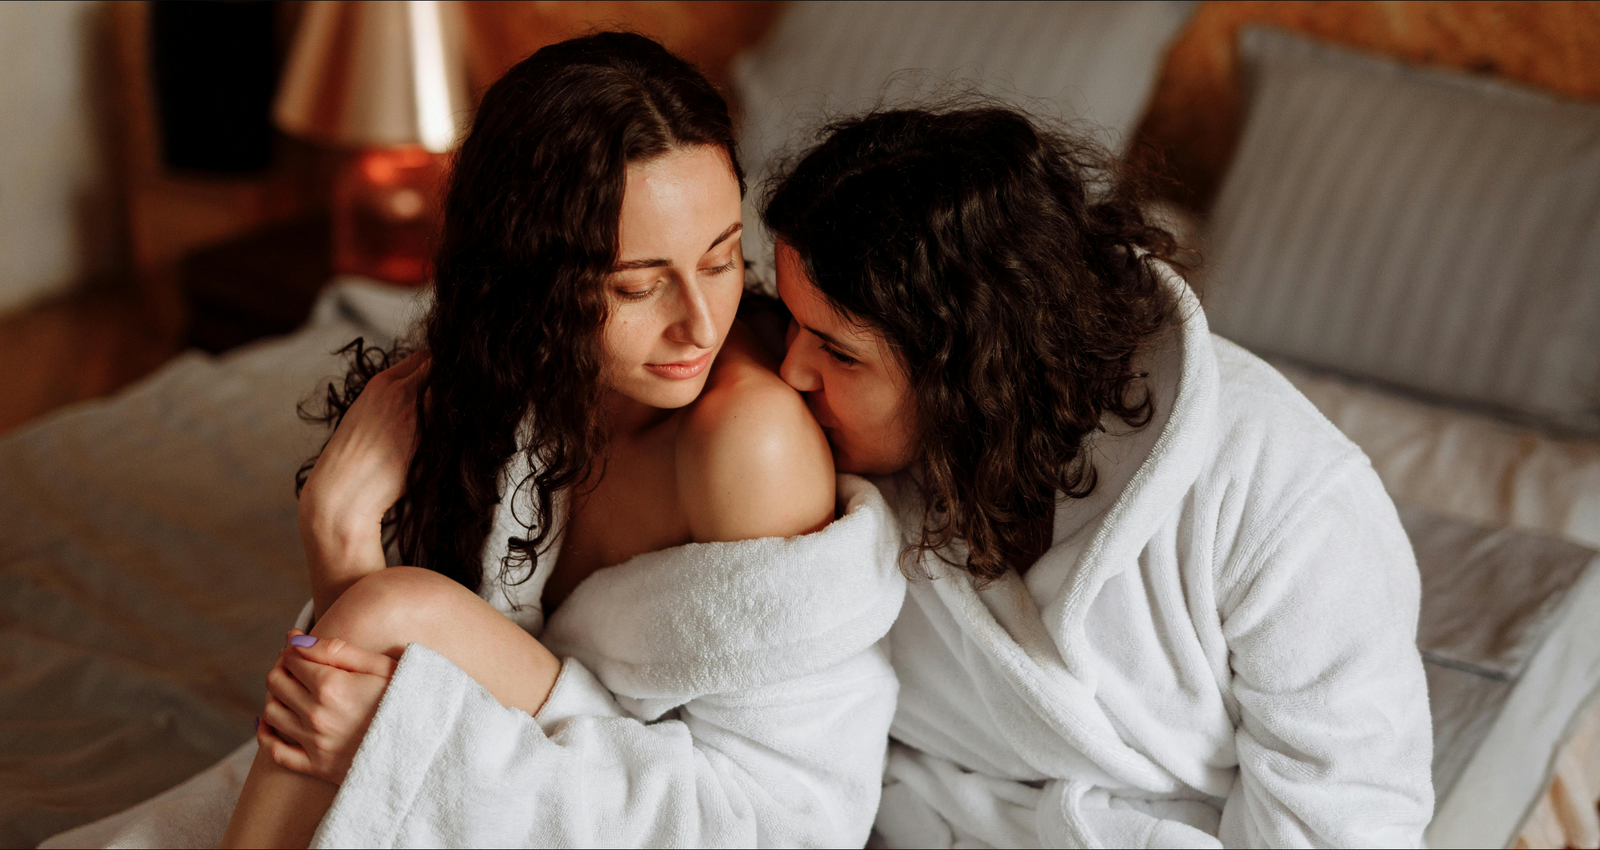 Two women in white bathrobes sharing an intimate moment, embracing and gazing into each other's eyes, conveying a sense of closeness and affection in a cozy, warmly lit bedroom setting.